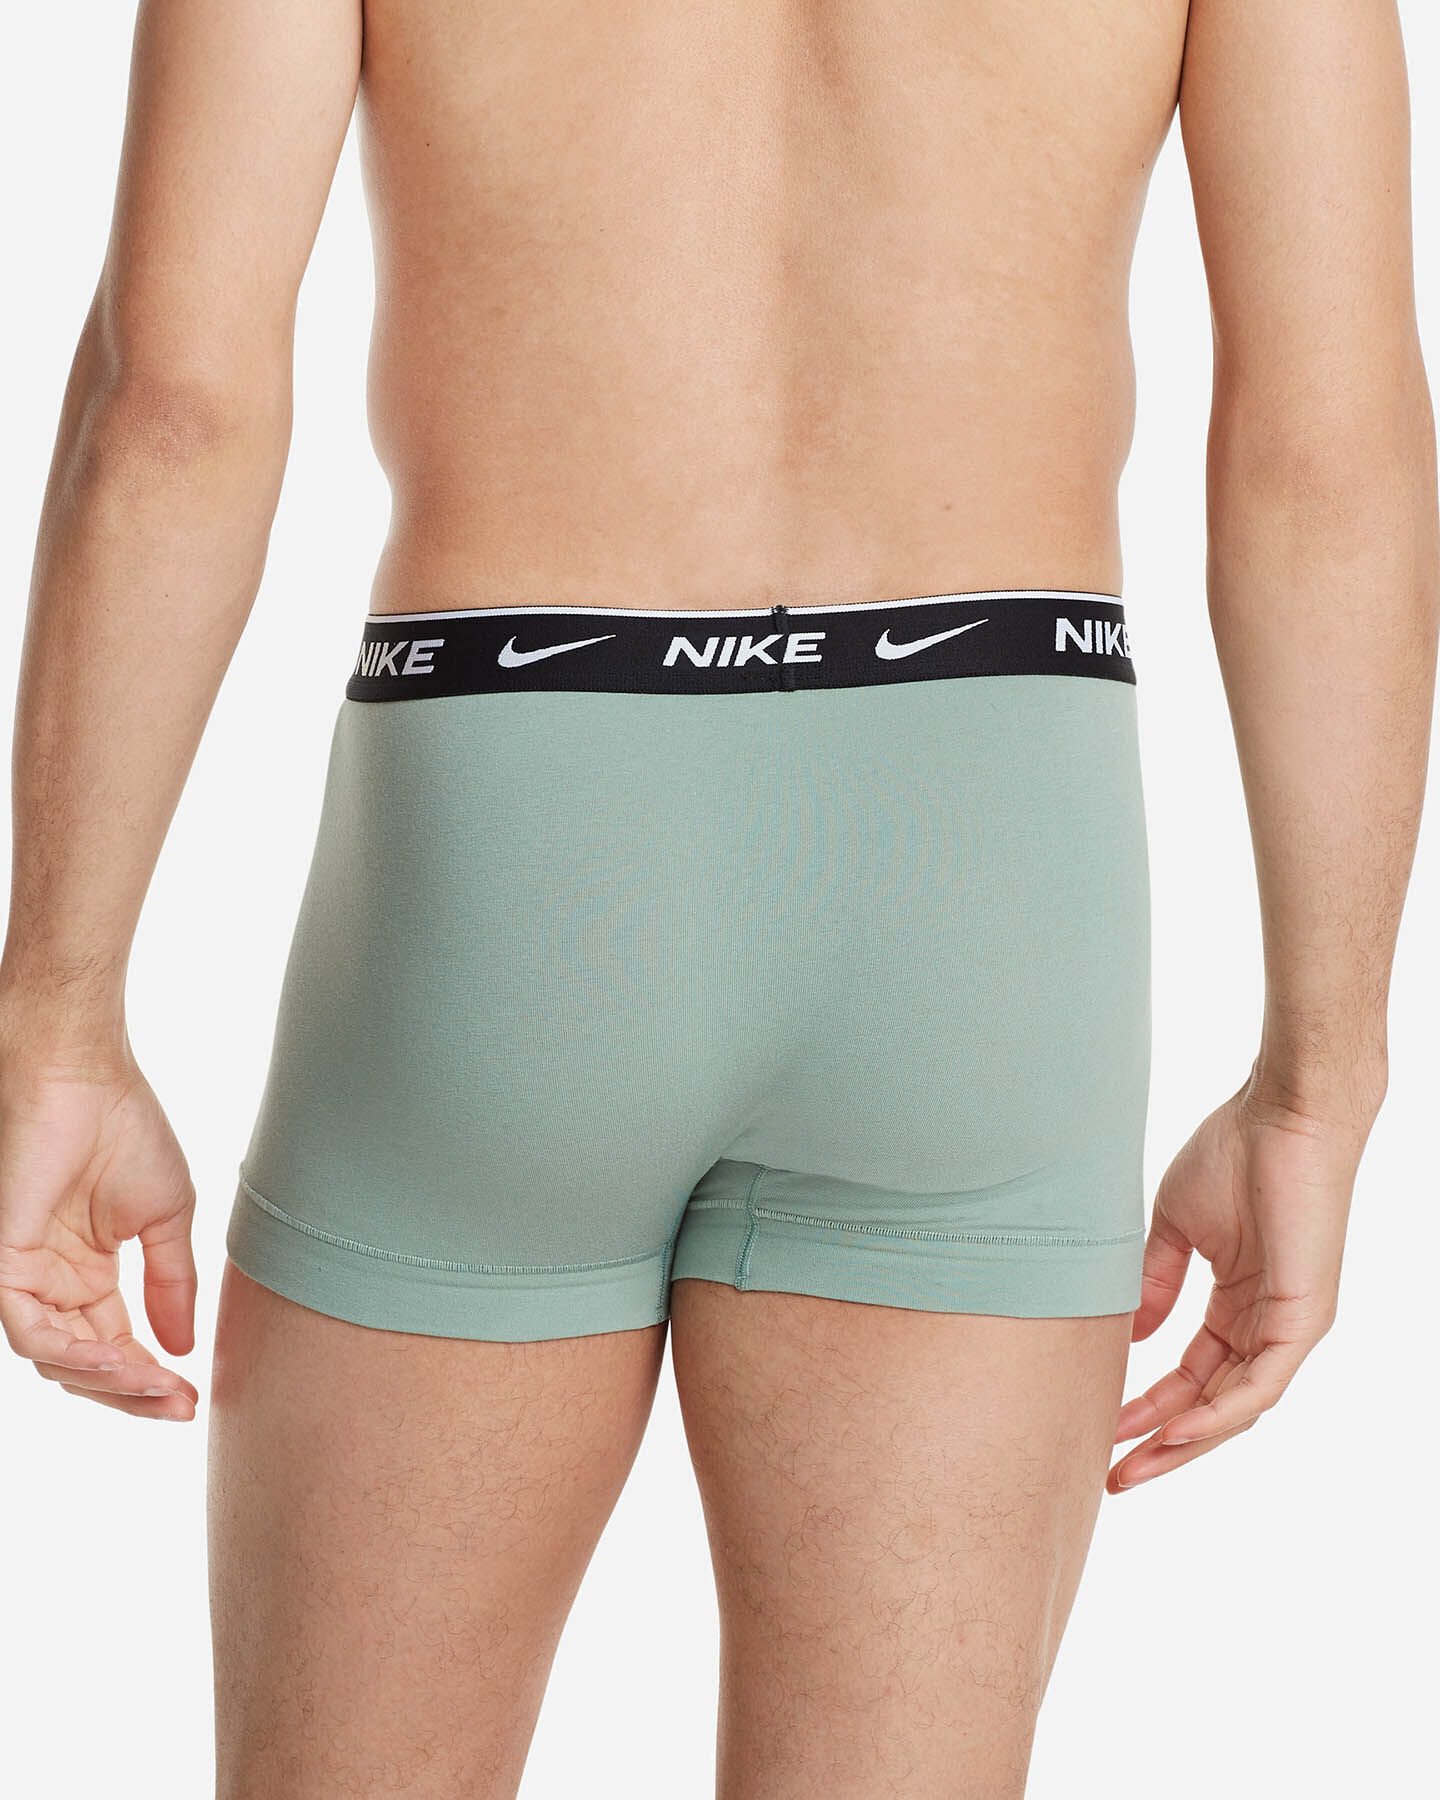  Intimo NIKE 3PACK BOXER EVERYDAY M S4099881|KUS|XL scatto 3